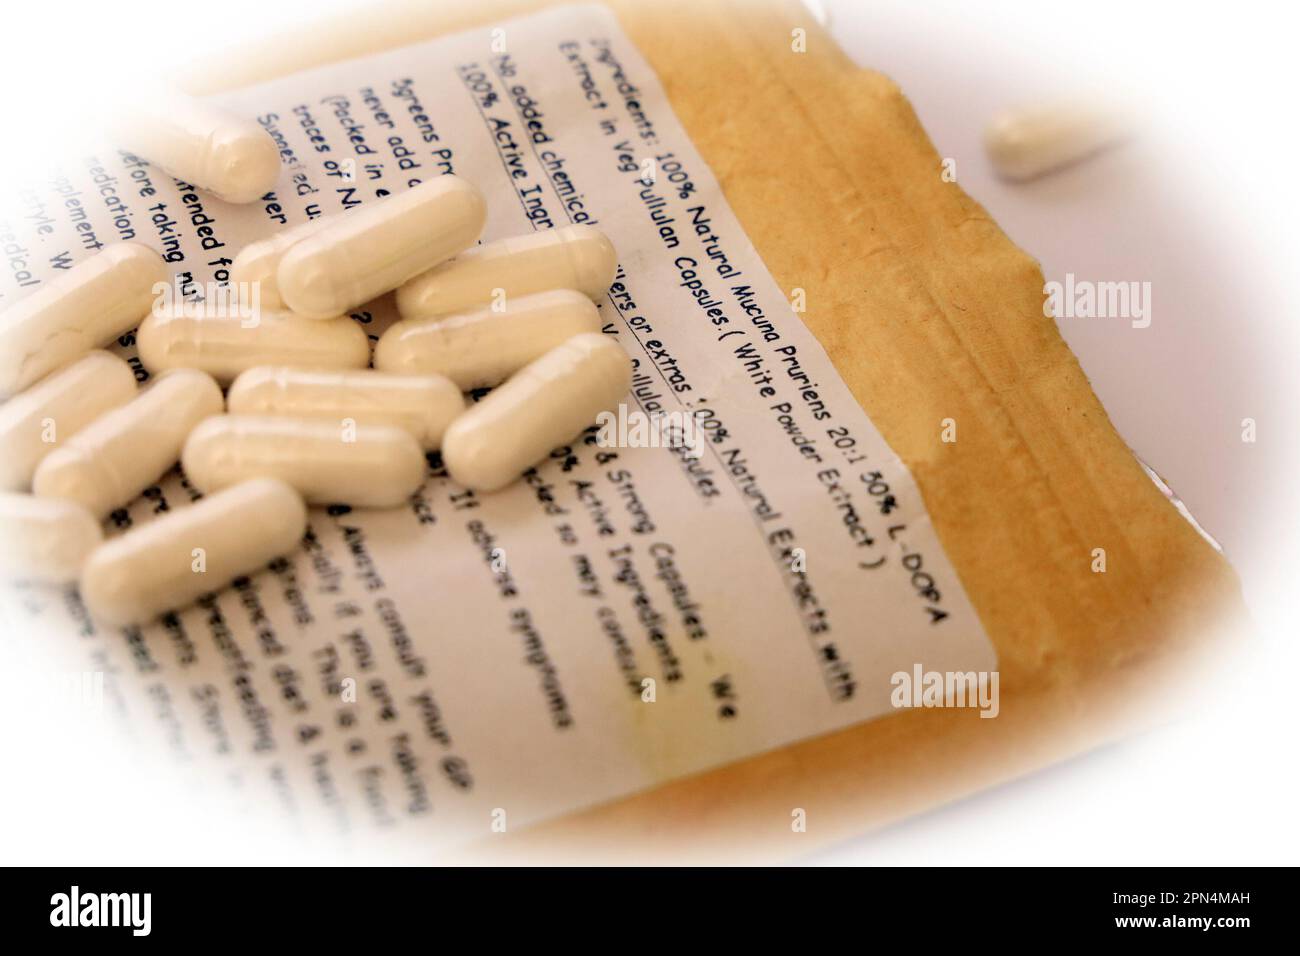 Mucuna pruriens herbal supplement capsules and packet Stock Photo